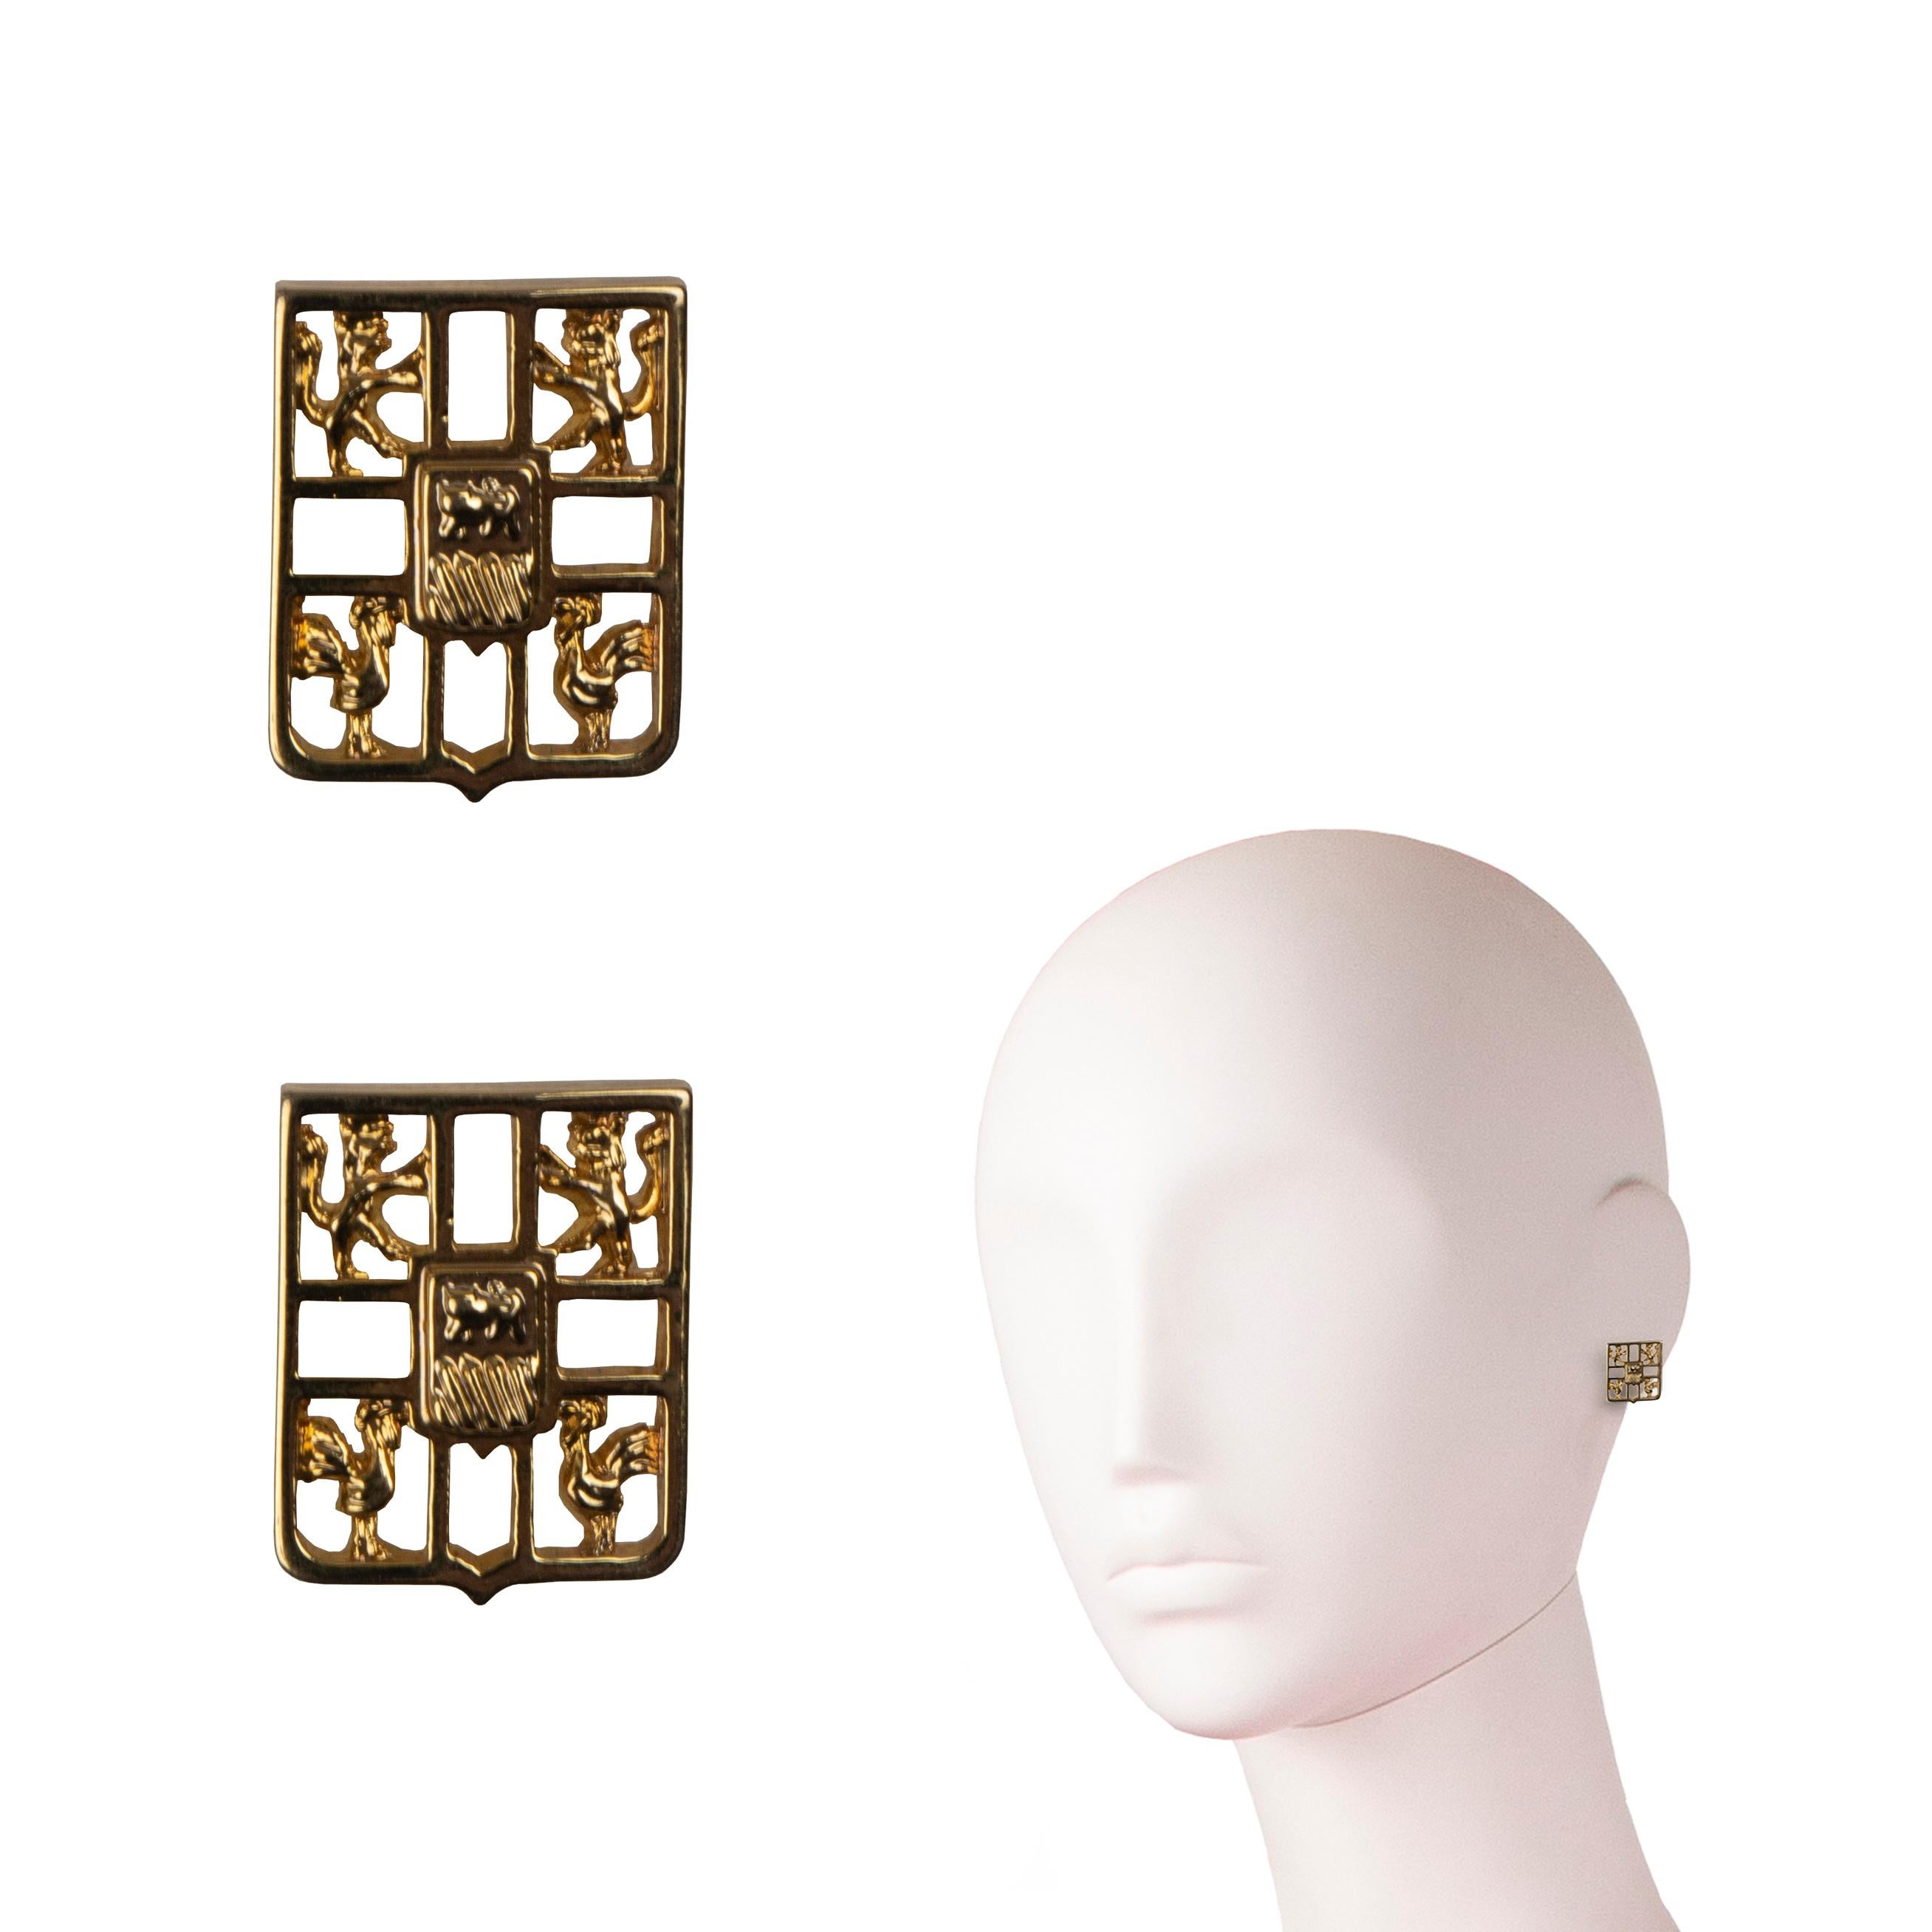 A pair of John Galliano logo earrings, circa 1996. These earrings showcase Galliano’s first logo, which was adopted from his family crest and debuted in the mid-80s. The logo, which appeared on garments until the early 2000s, is a hallmark of